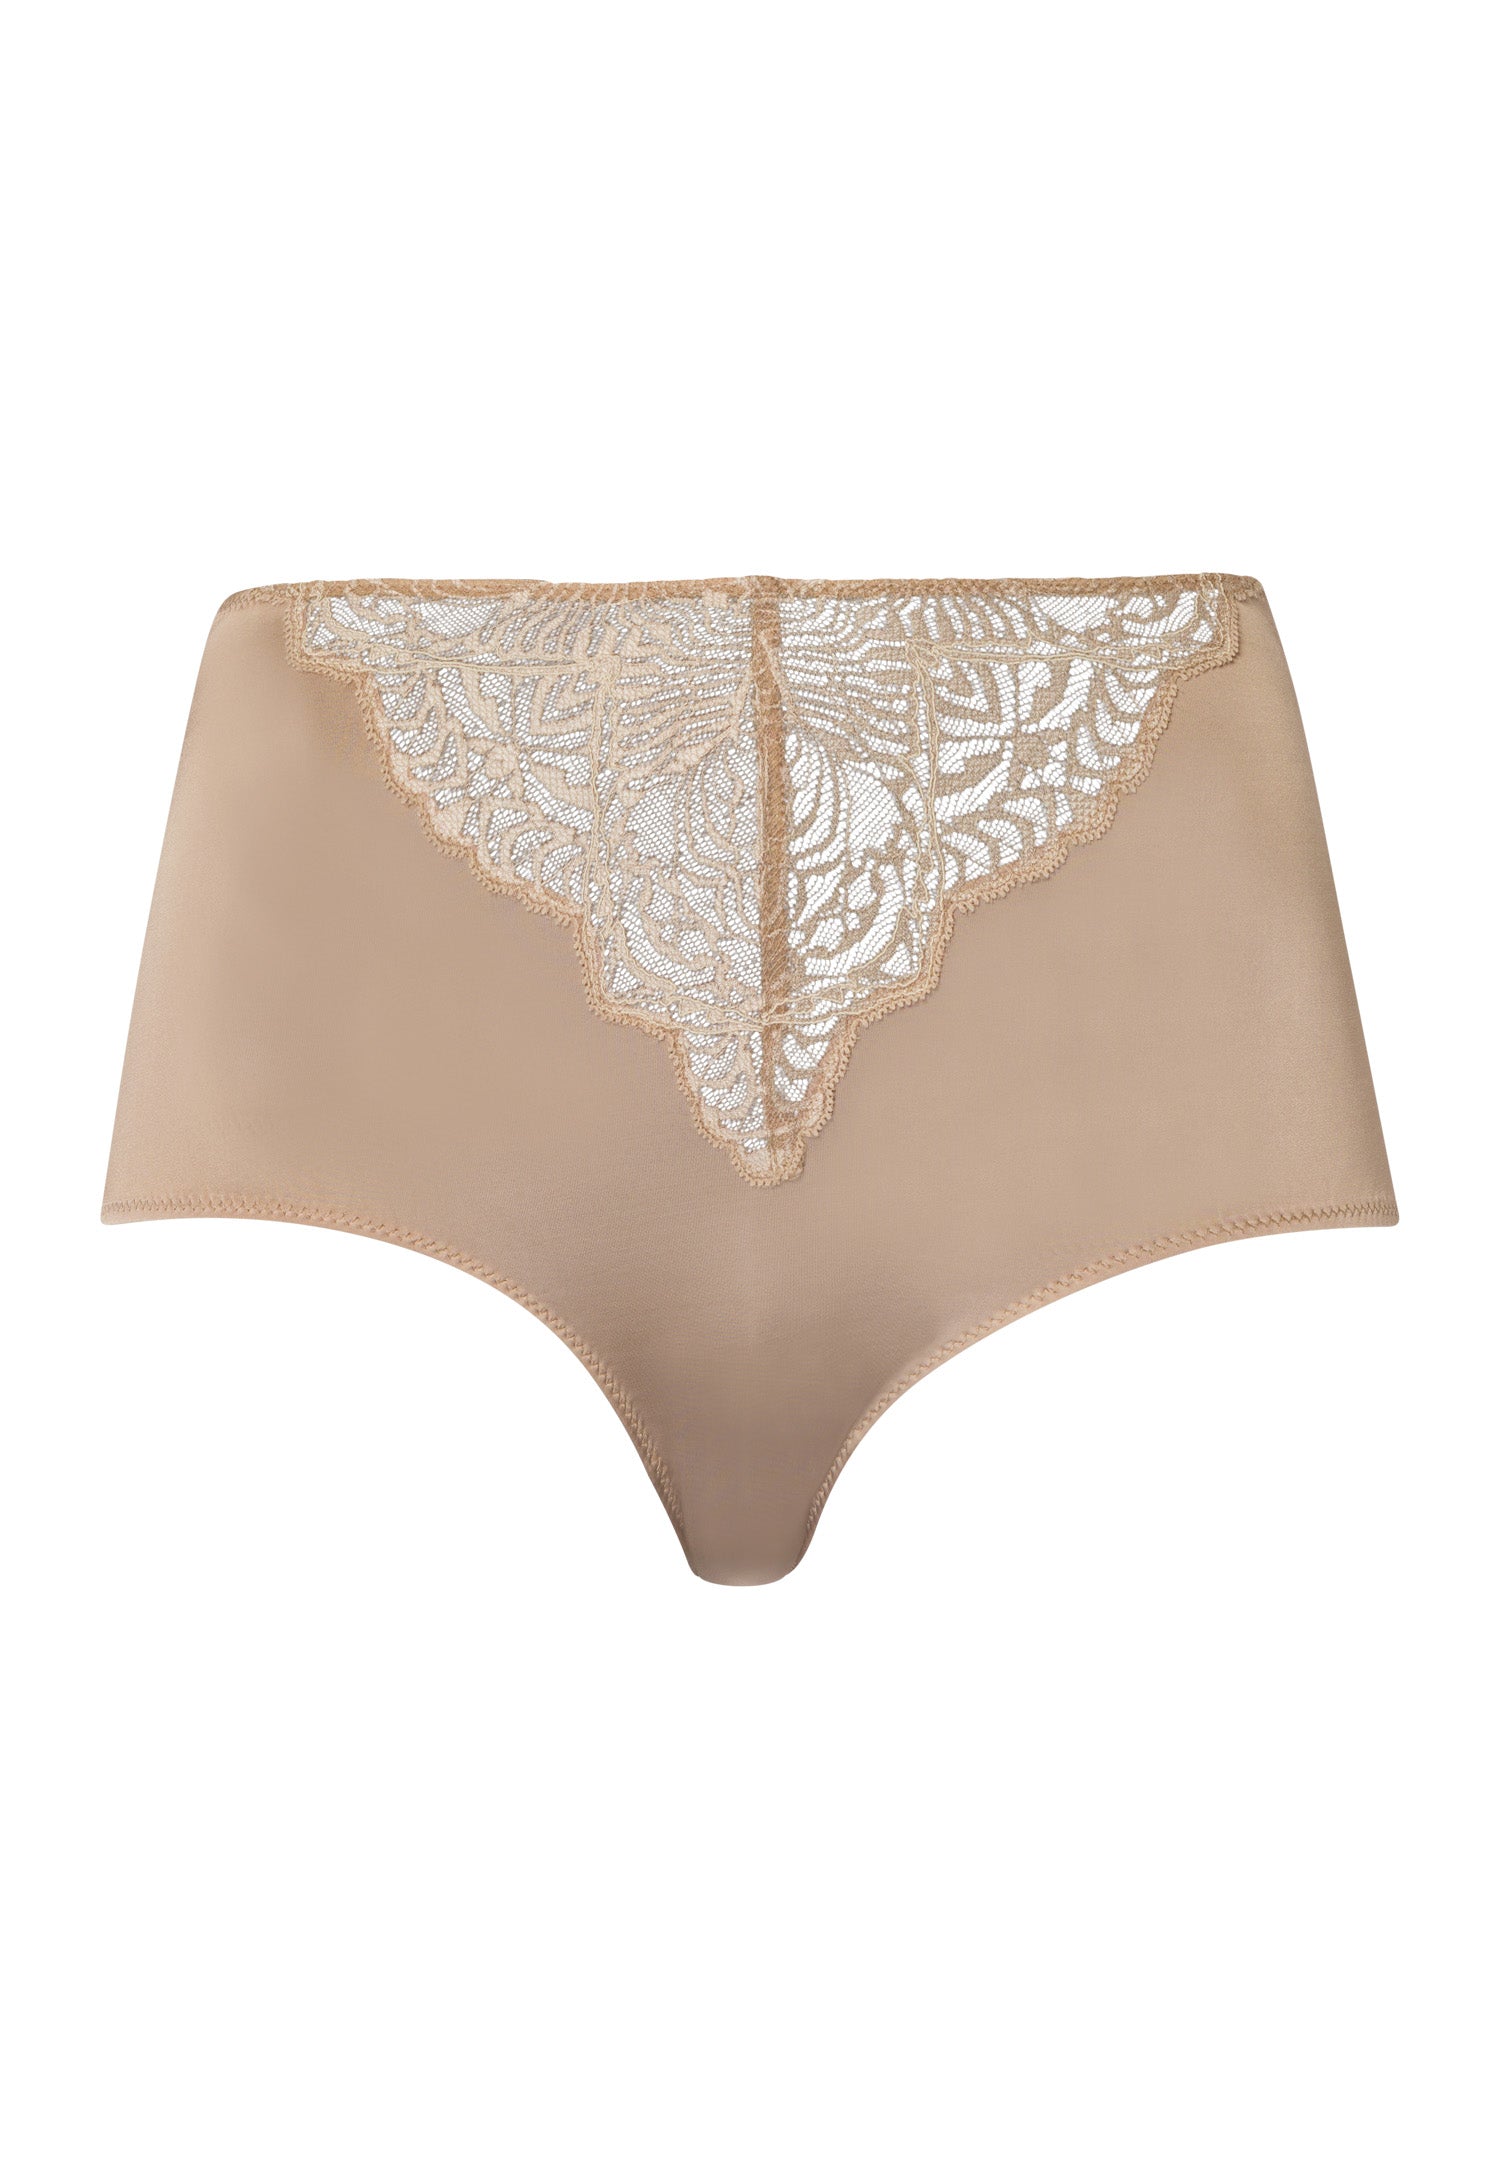 70951 FULL BRIEF - 2828 Deep Taupe